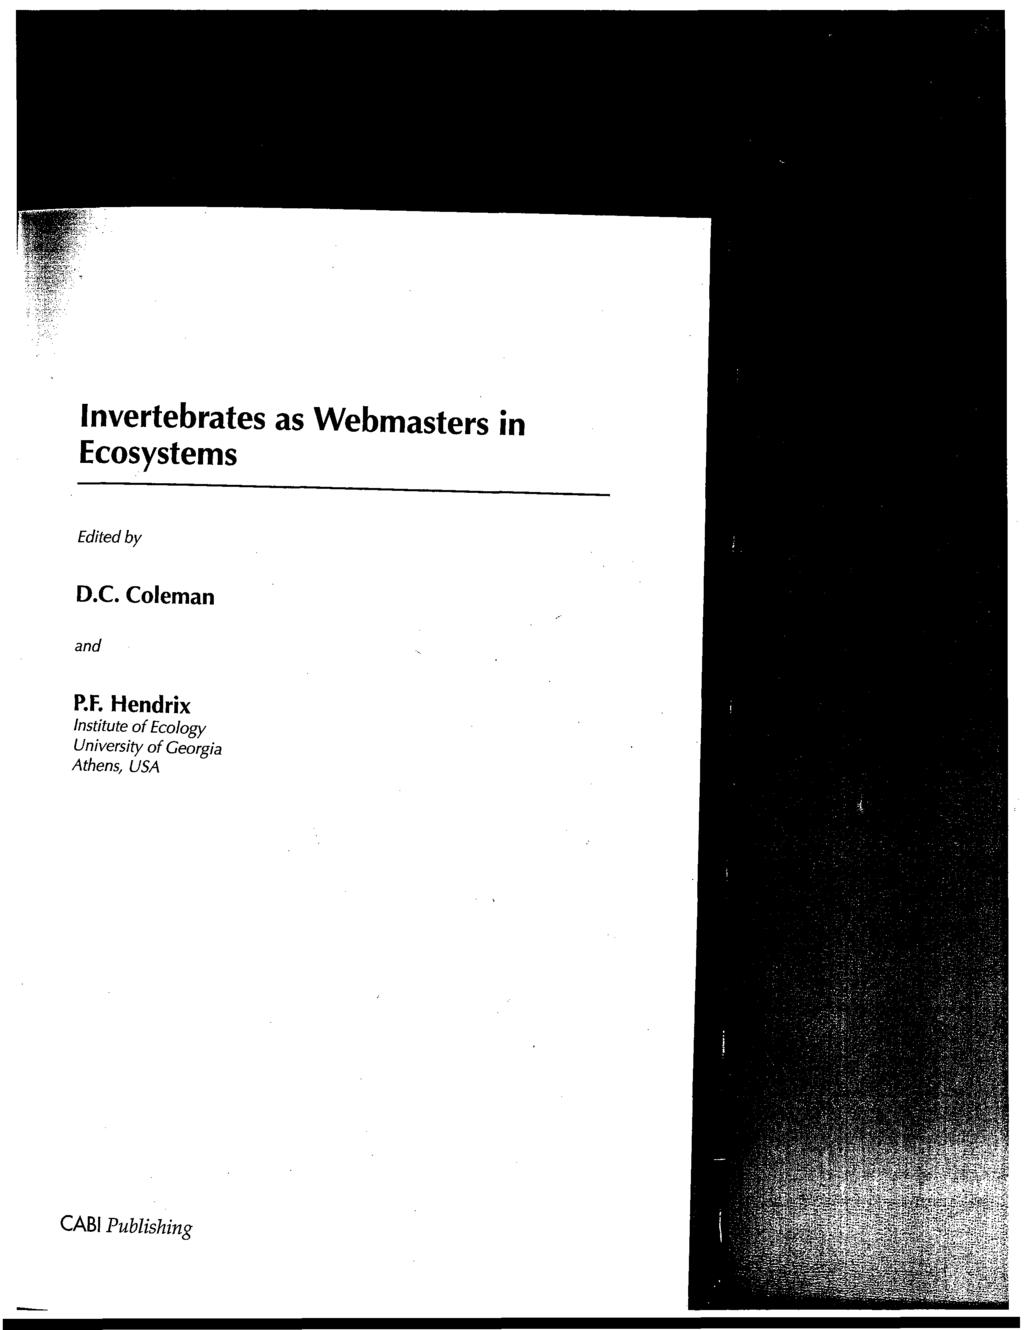 Invertebrates as Webmasters in Ecosystems Edited by D.C. Coleman and P.